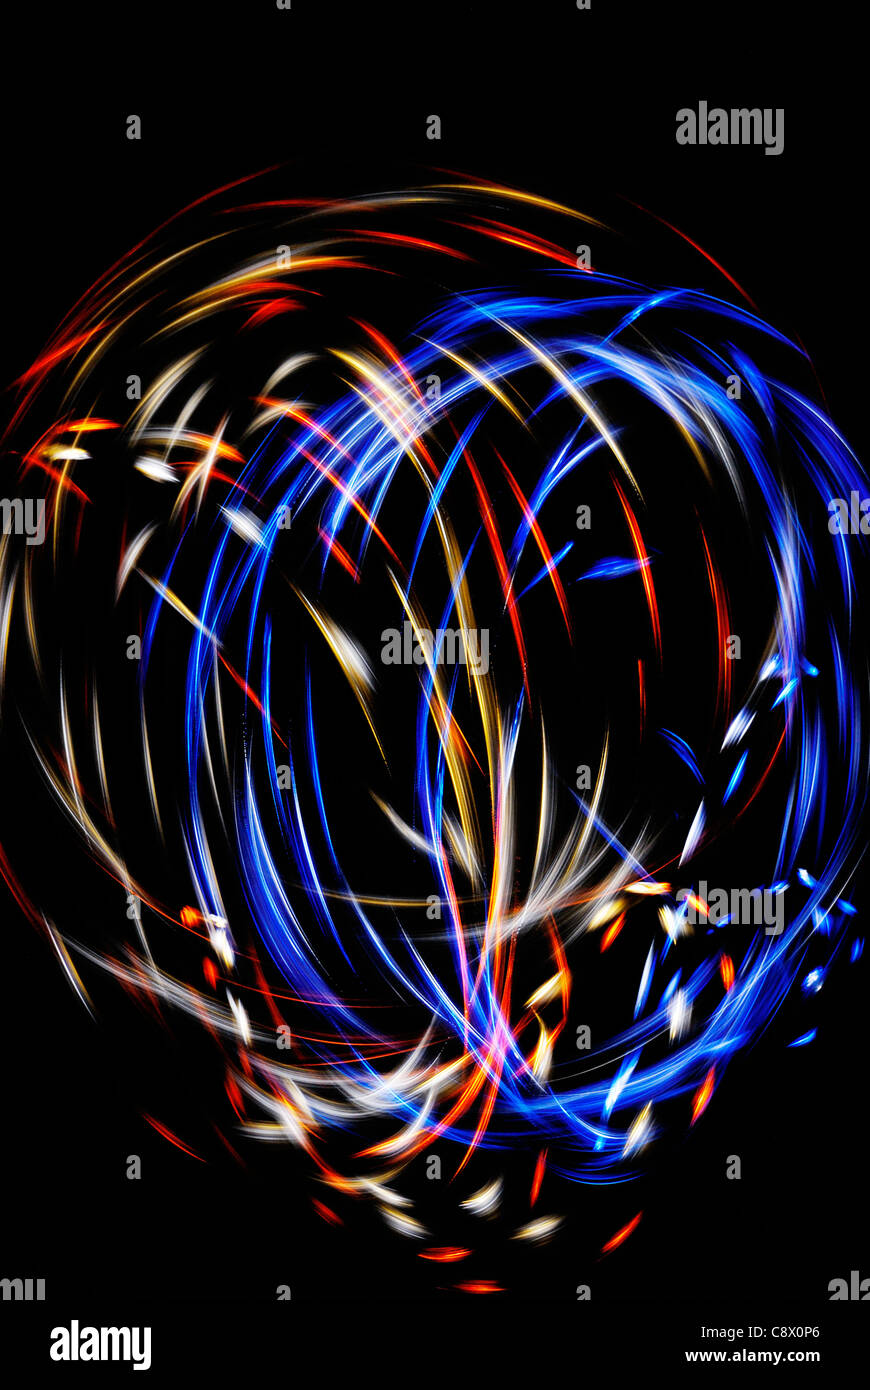 Glowstringing - Light patterns created by twirling Poi at night - LED glowsticks on strings. Stock Photo